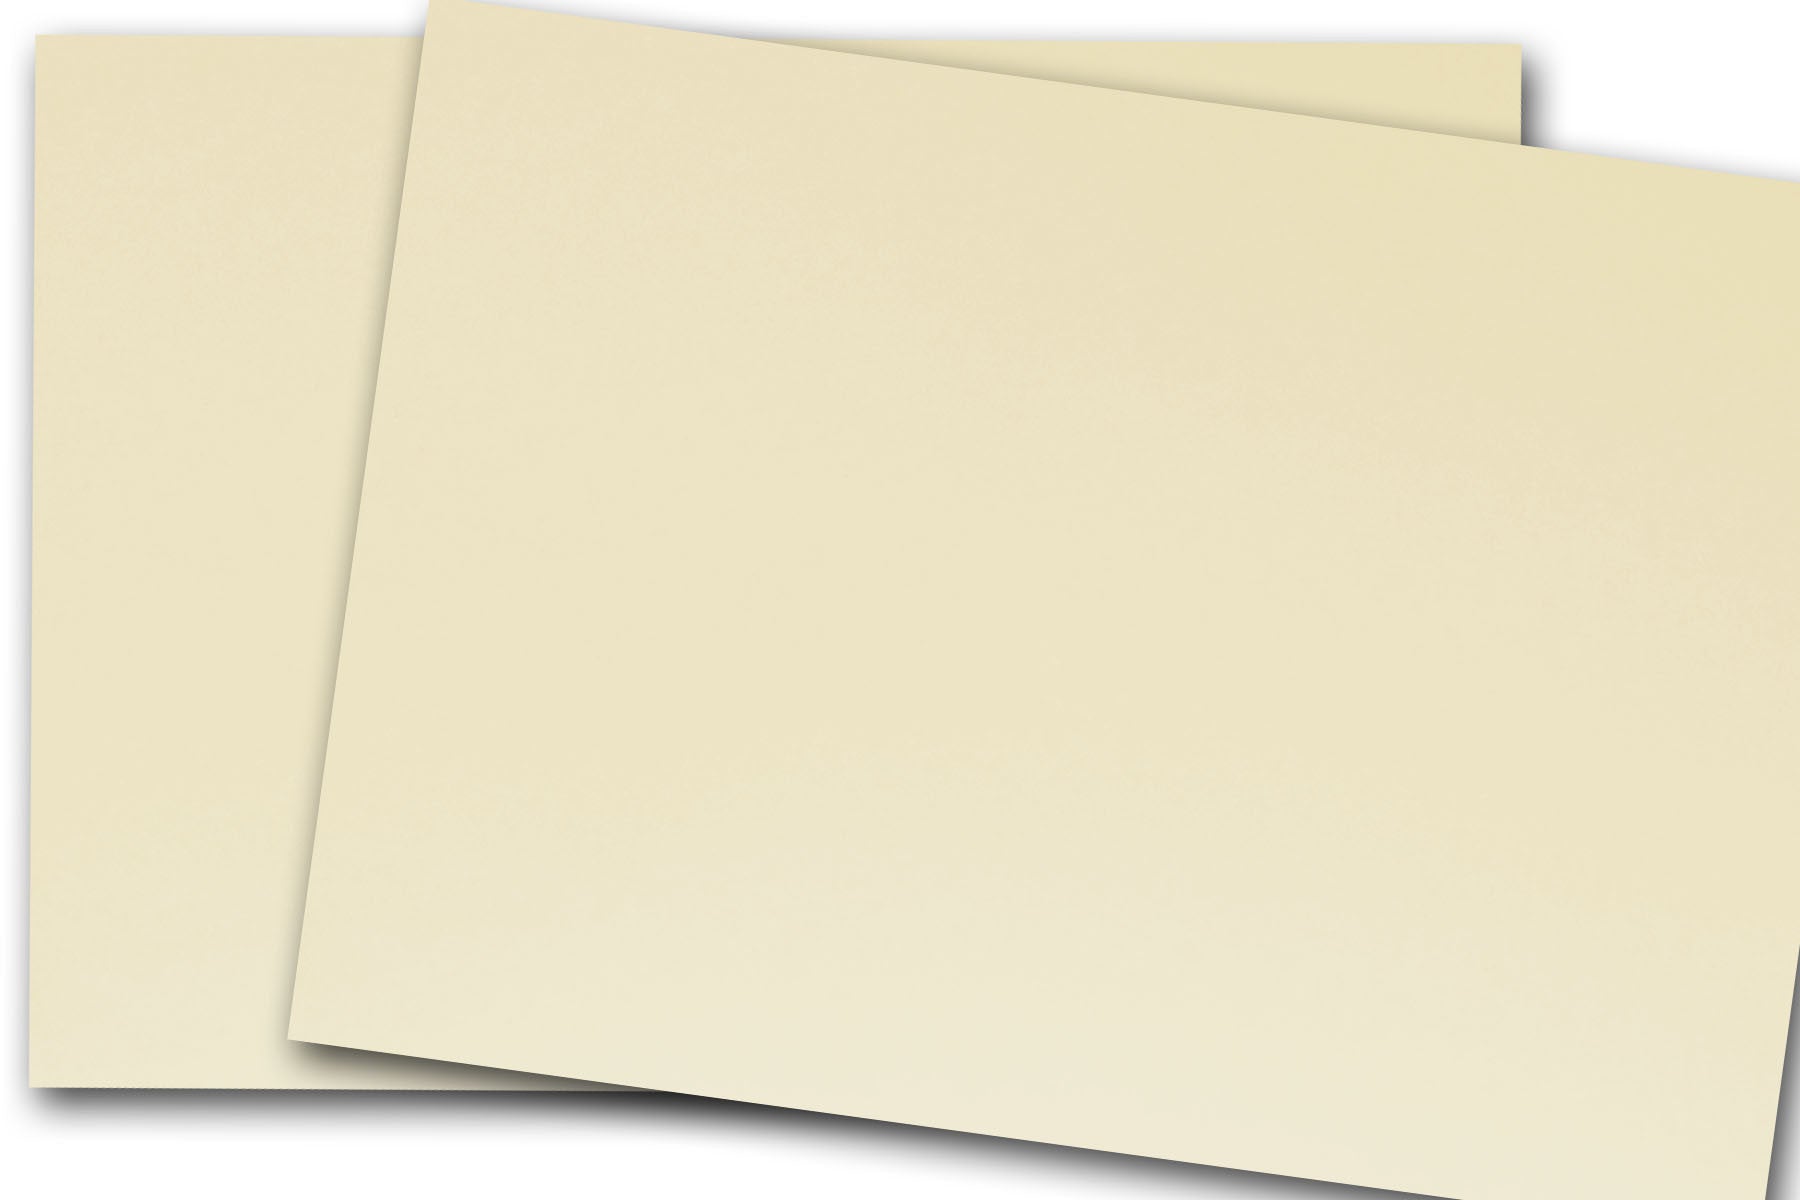 Linen Textured Cardstock Paper, 8.5 x 11, Baronial Ivory, 80lb